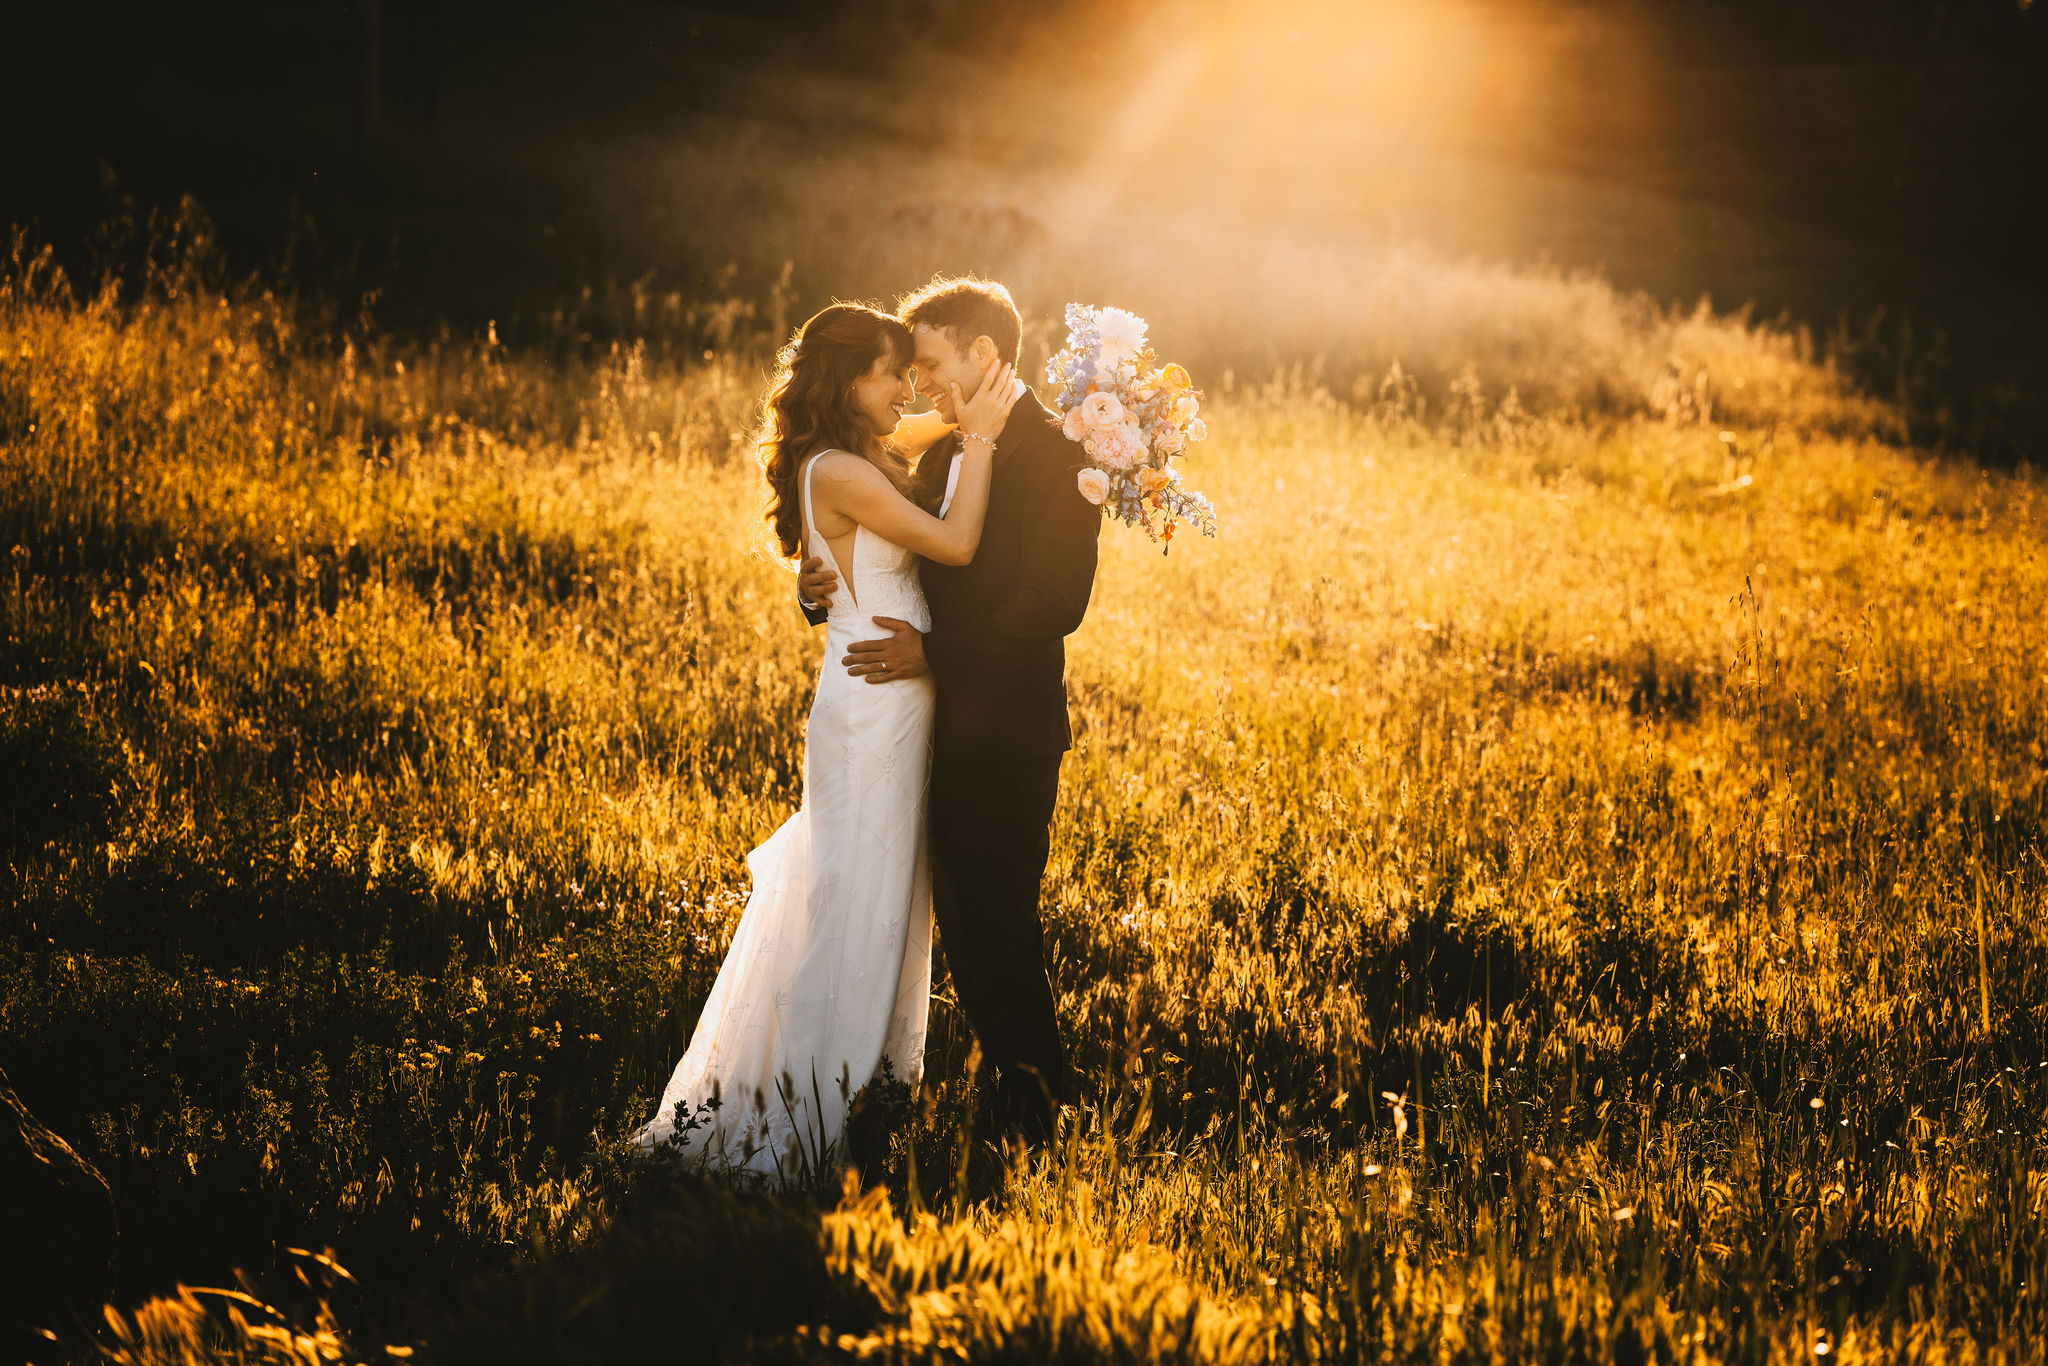 Romantic sunset photo during wine country wedding at Mountain House Estate